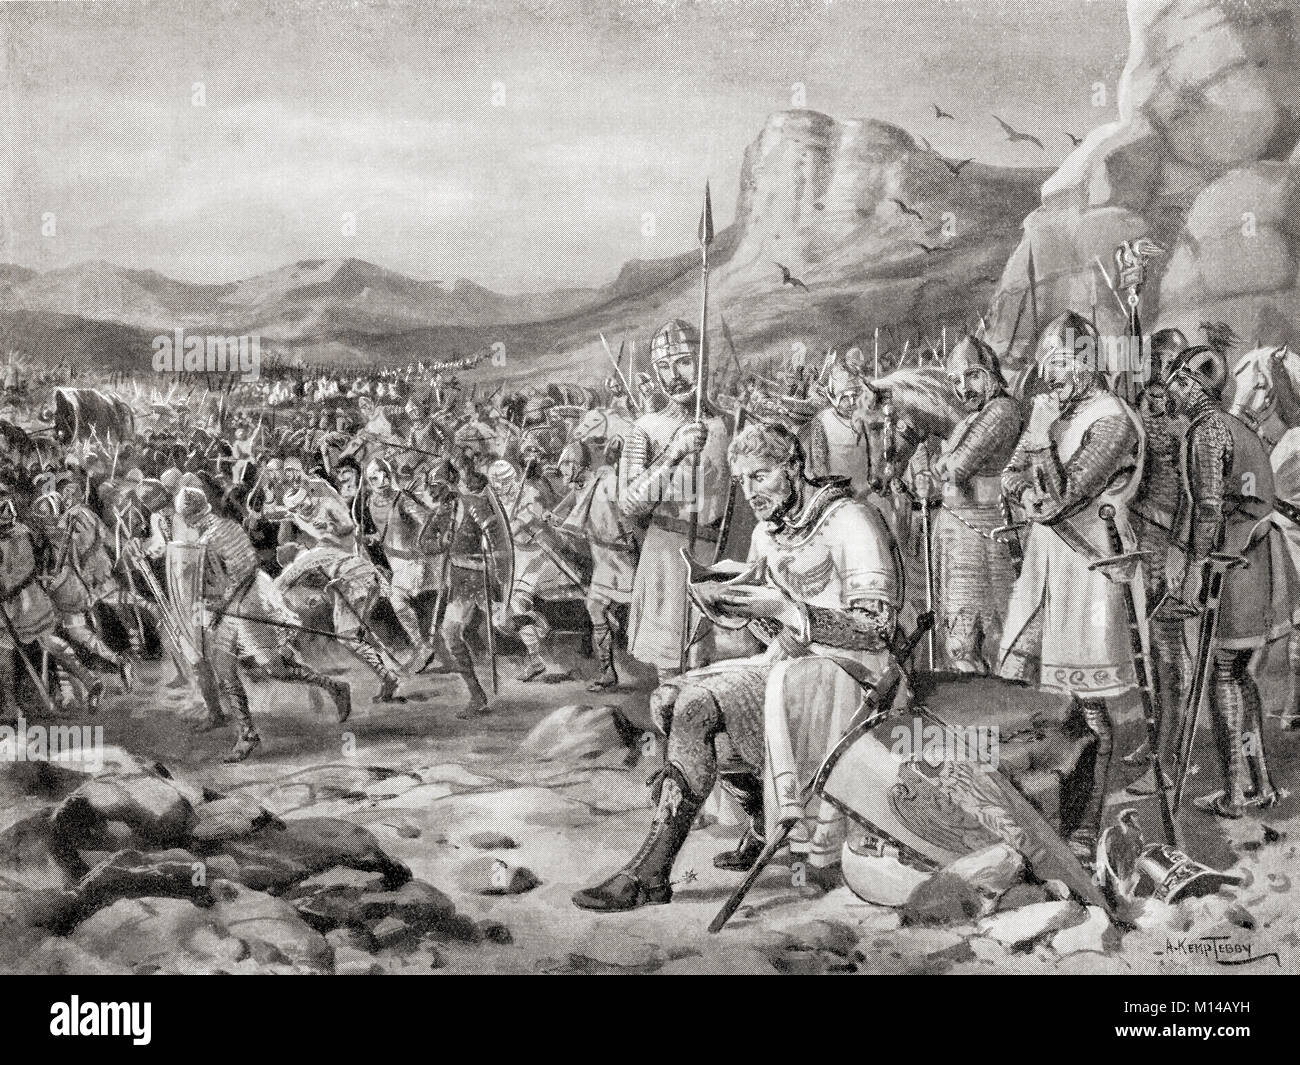 The defeat of Manuel I at The Battle of Myriokephalon, aka Battle of Myriocephalum, 1176. Manuel I Komnenos or Comnenus, 1118 – 1180. Byzantine Emperor.   From Hutchinson's History of the Nations, published 1915. Stock Photo